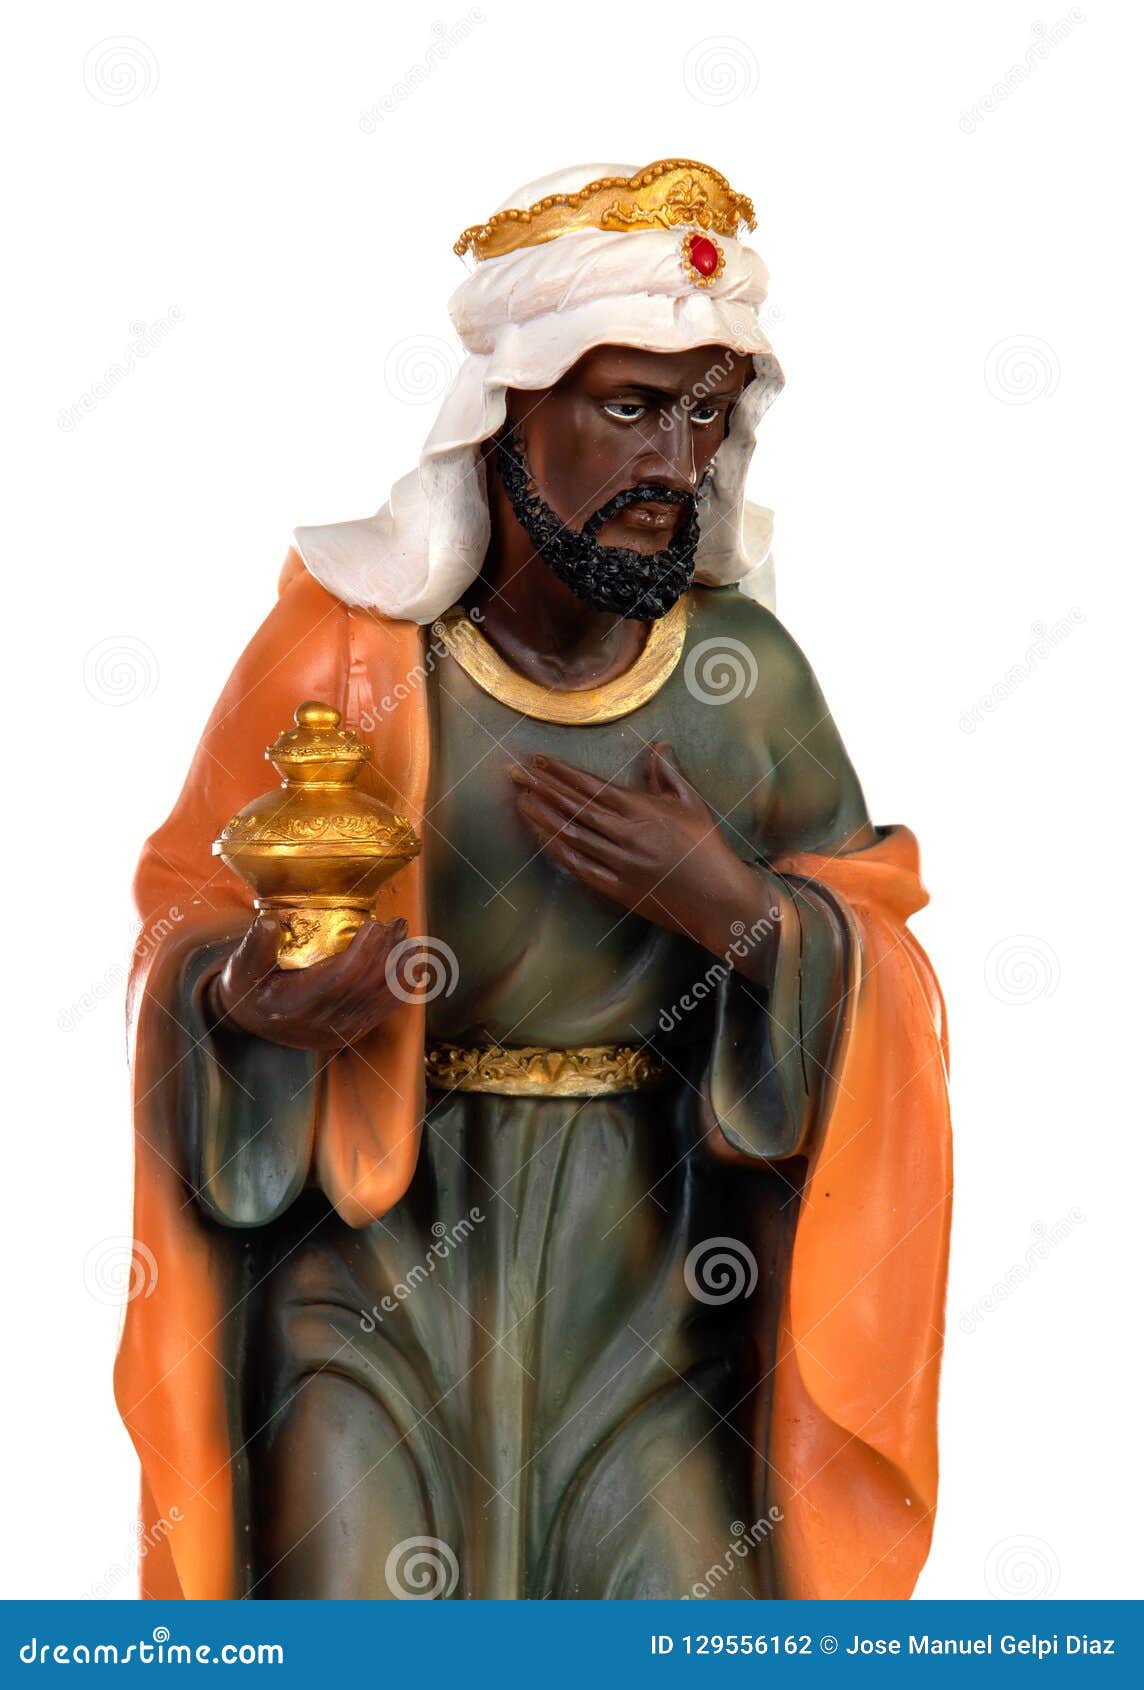 baltasar, one of the three wise men.